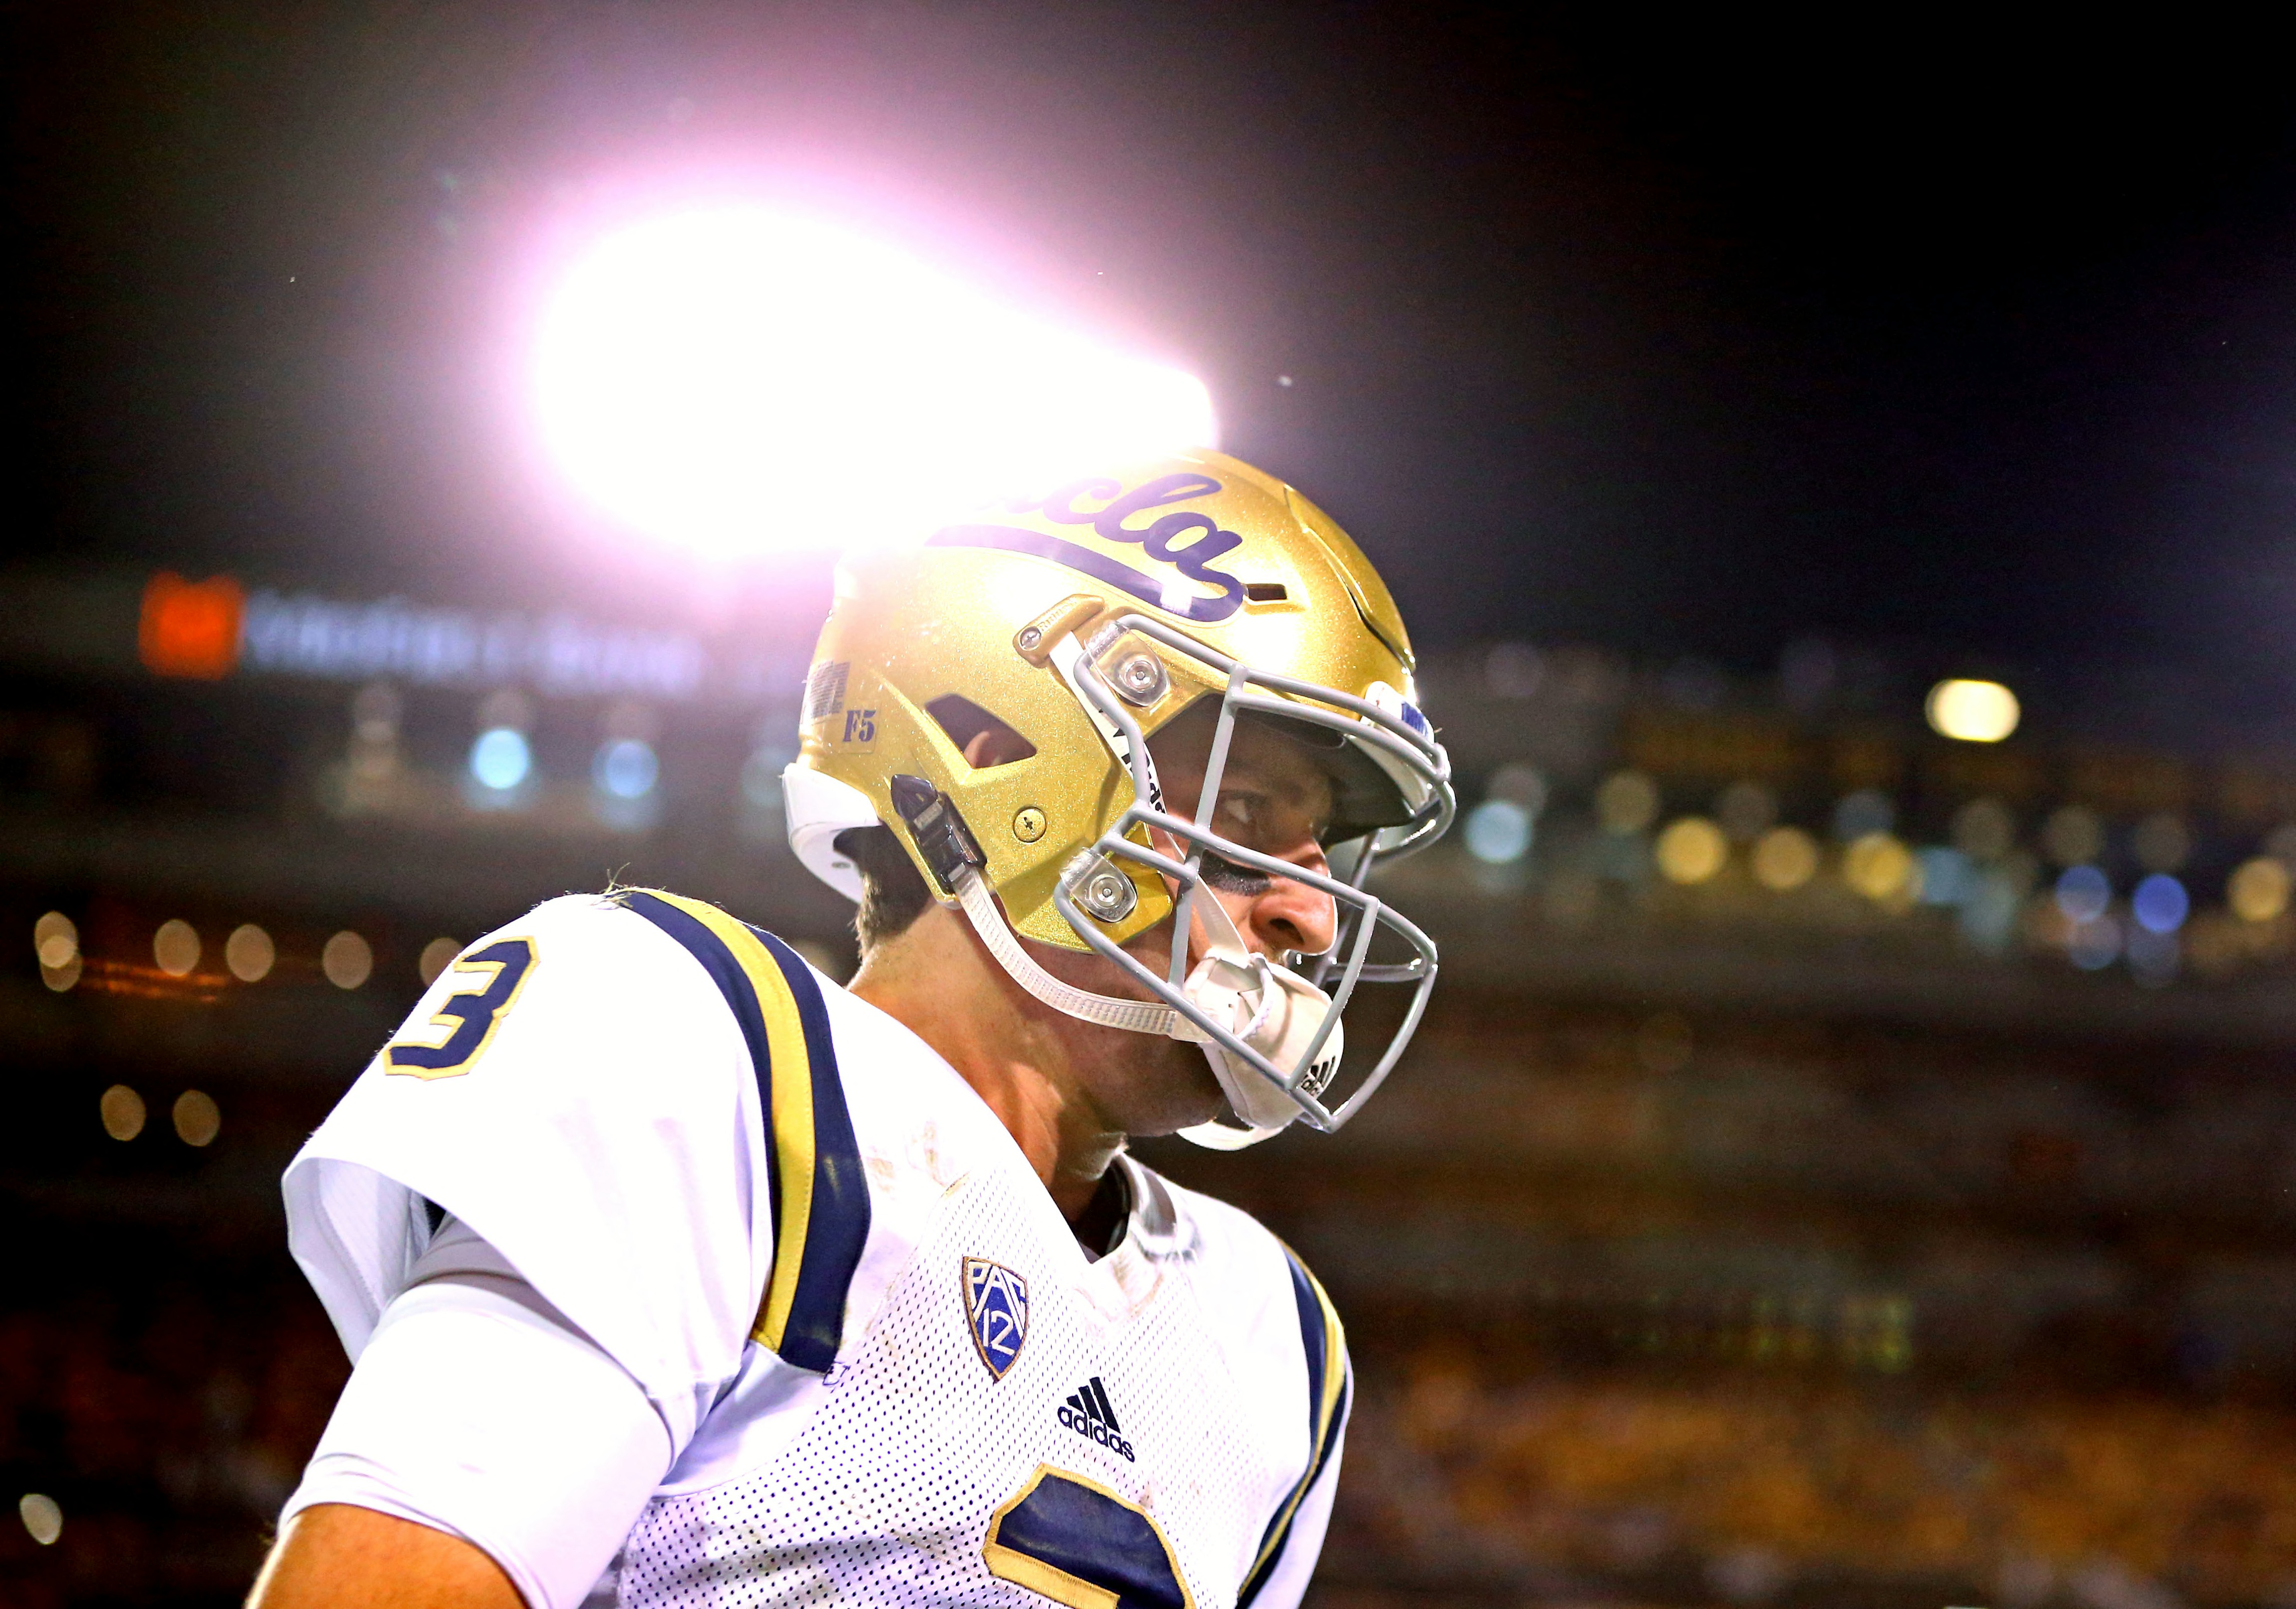 Ucla Football Making The Case For Josh Rosen To Be The No 1 Pick In 2018 Nfl Draft